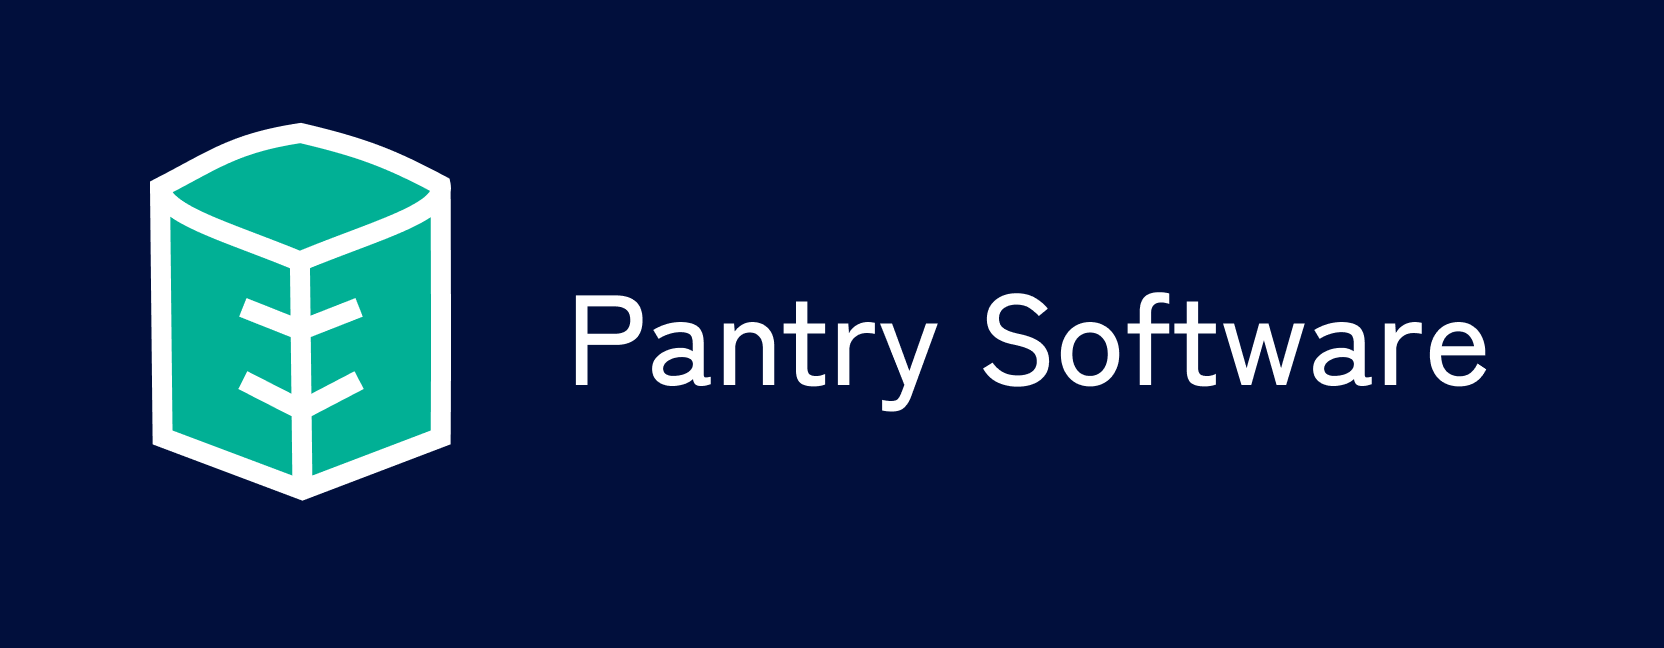 Pantry Software